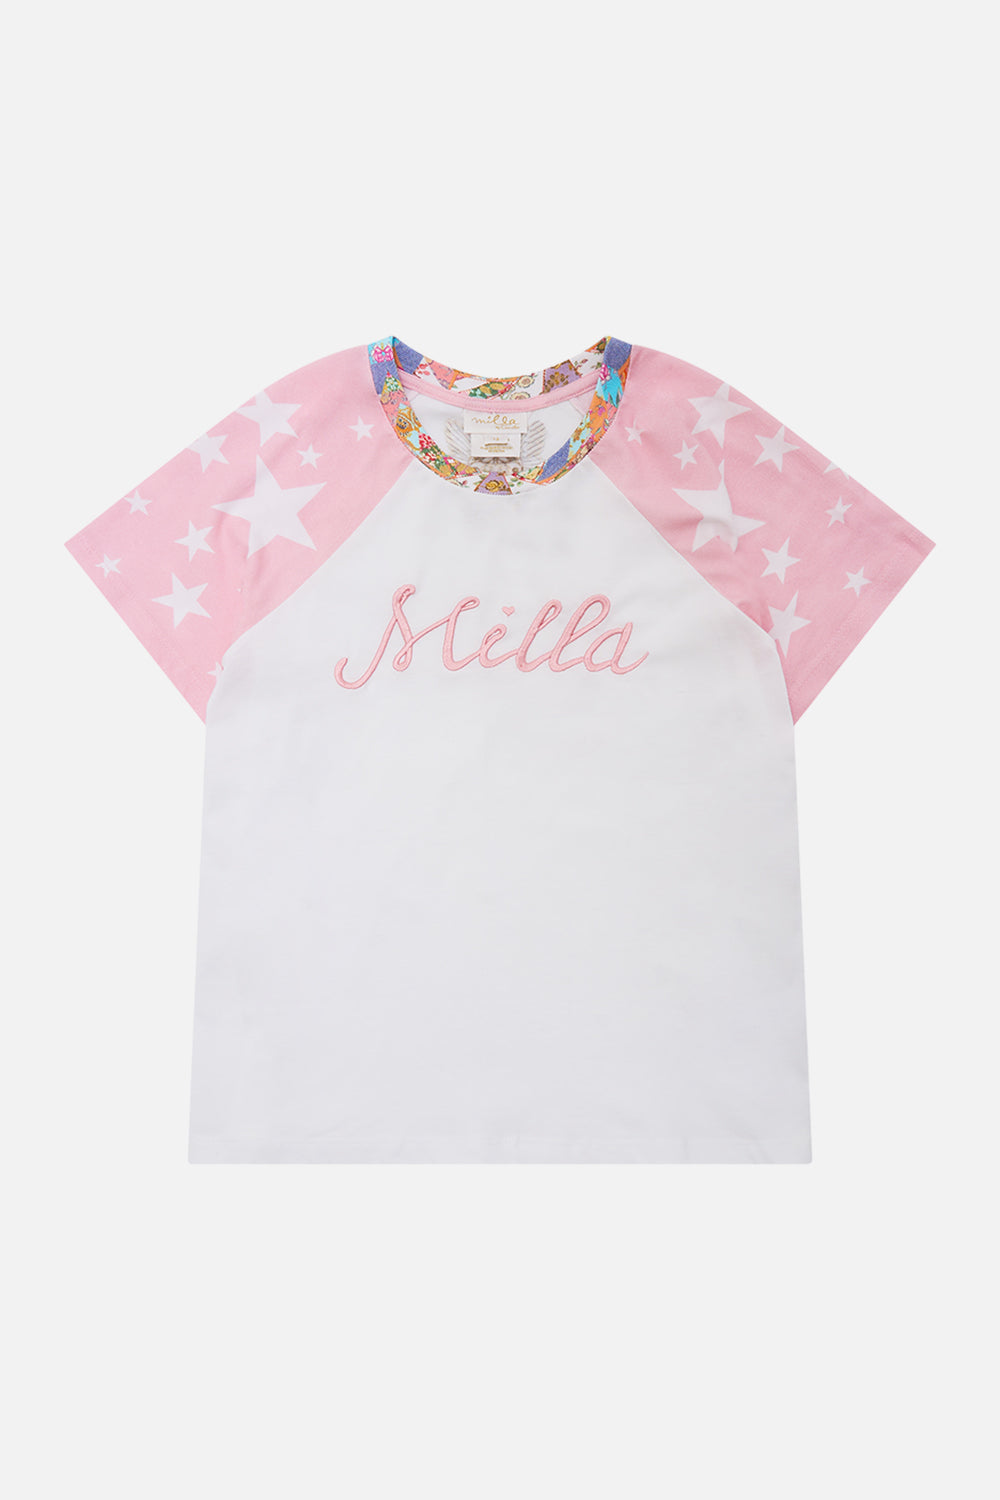 Milla by CAMILLA floral kids raglan tee (12-14) in Sew Yesterday